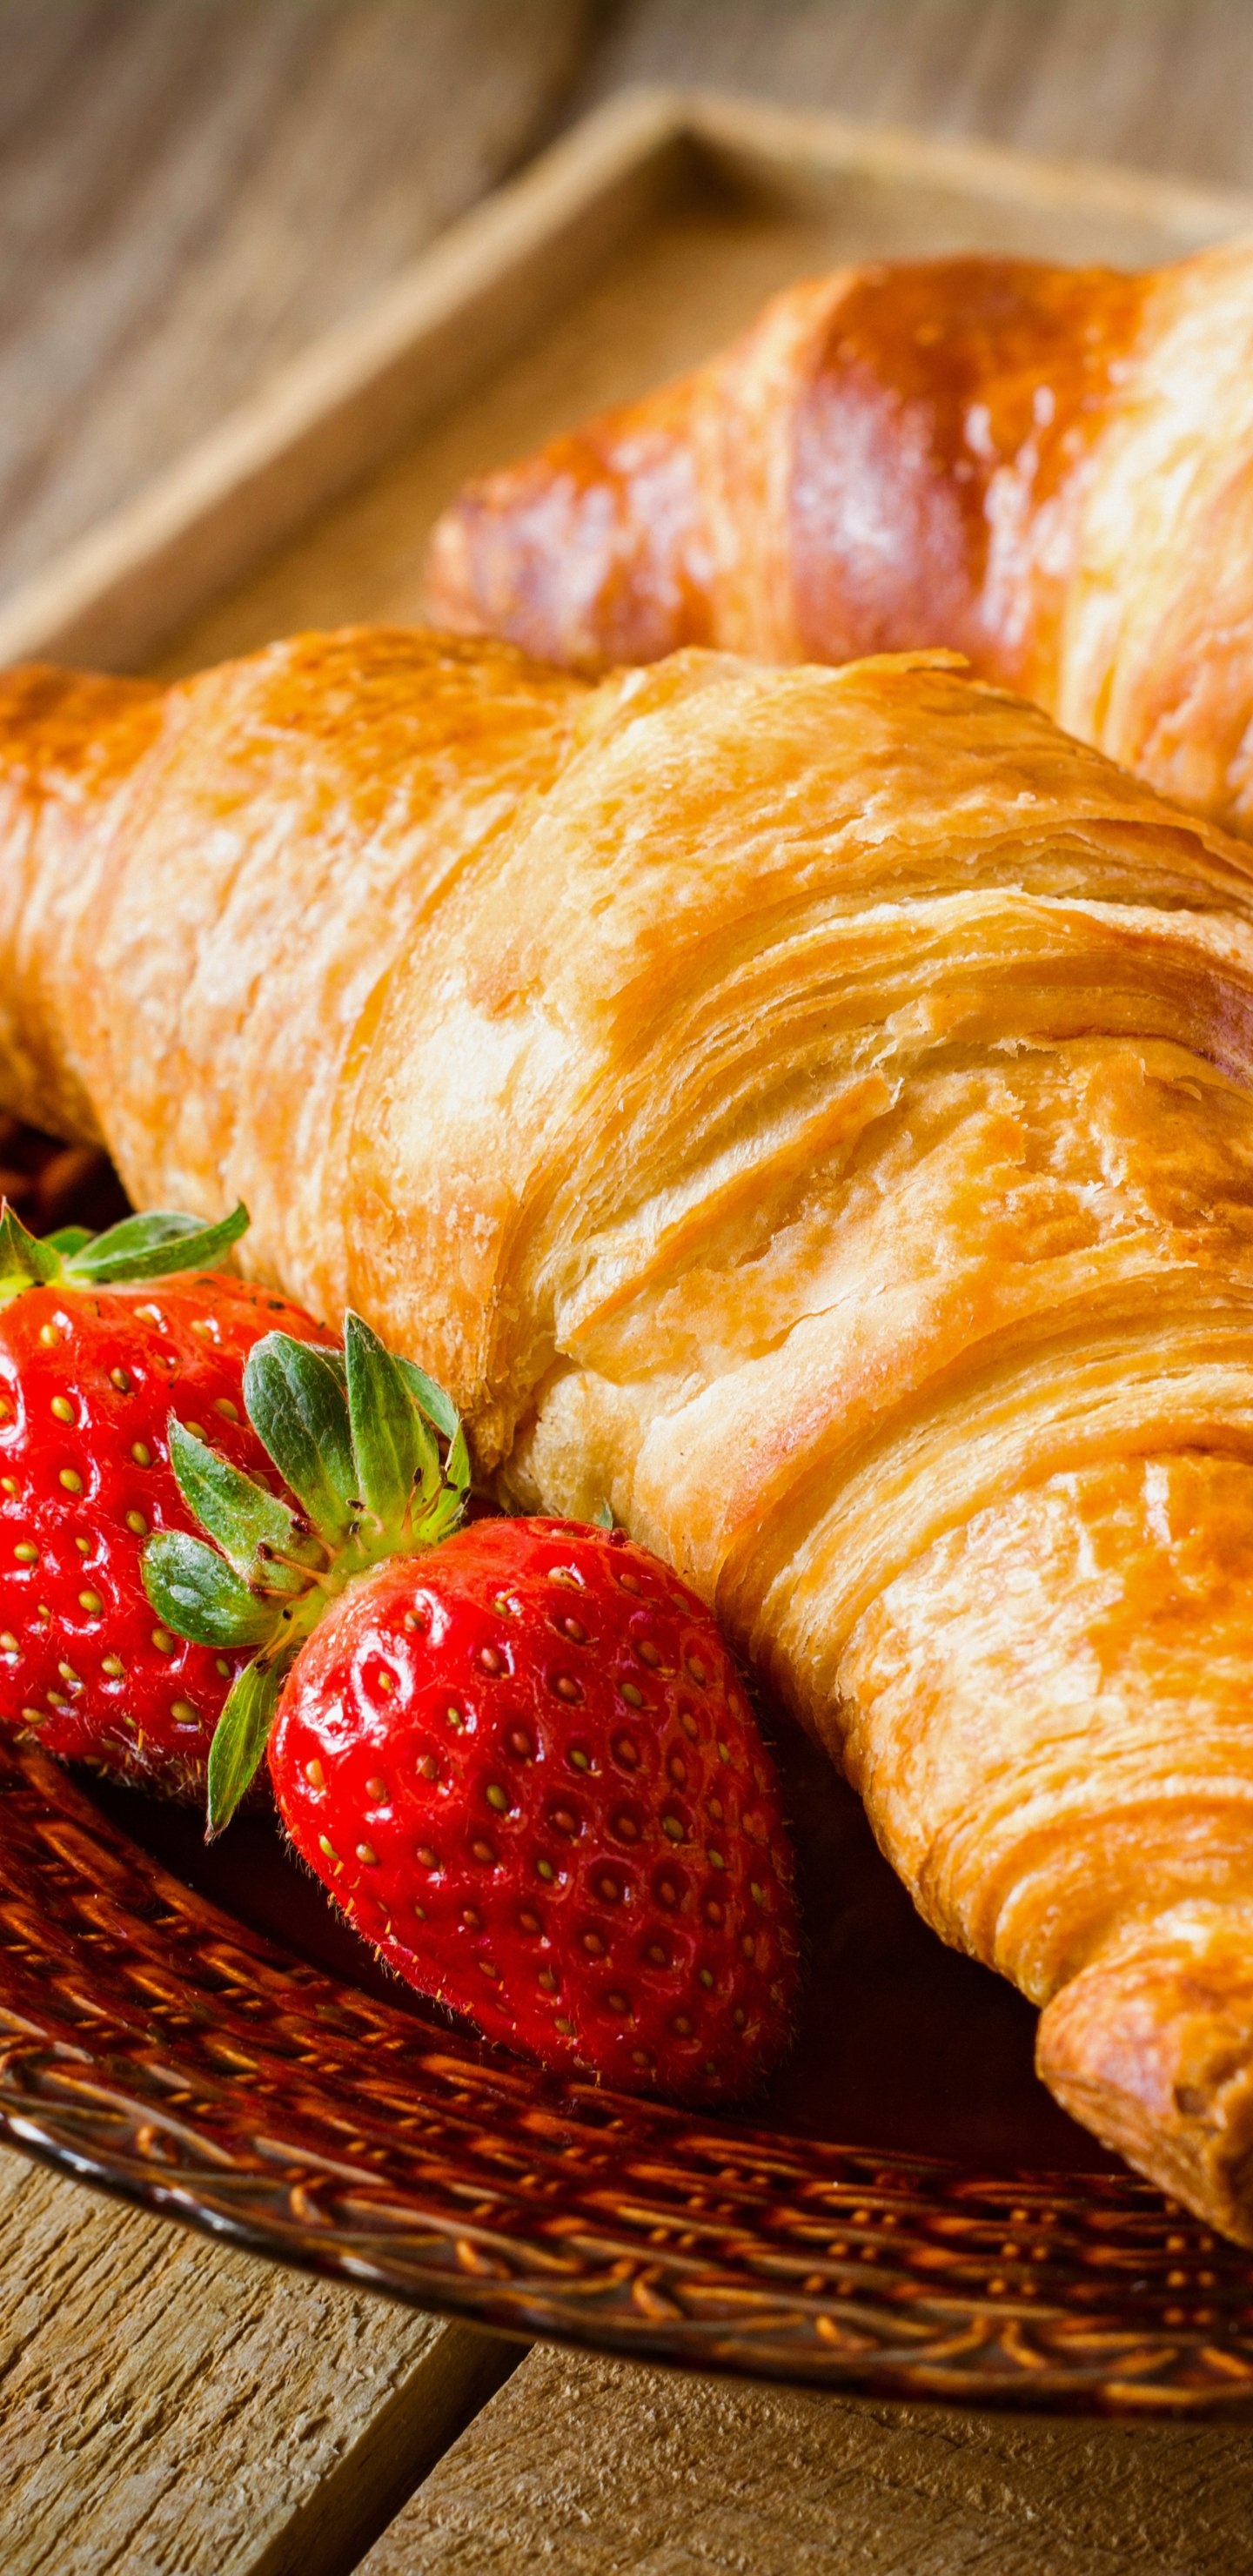 Croissant: Wrapped around any praline, almond paste, or chocolate before it is baked. 1440x2960 HD Wallpaper.